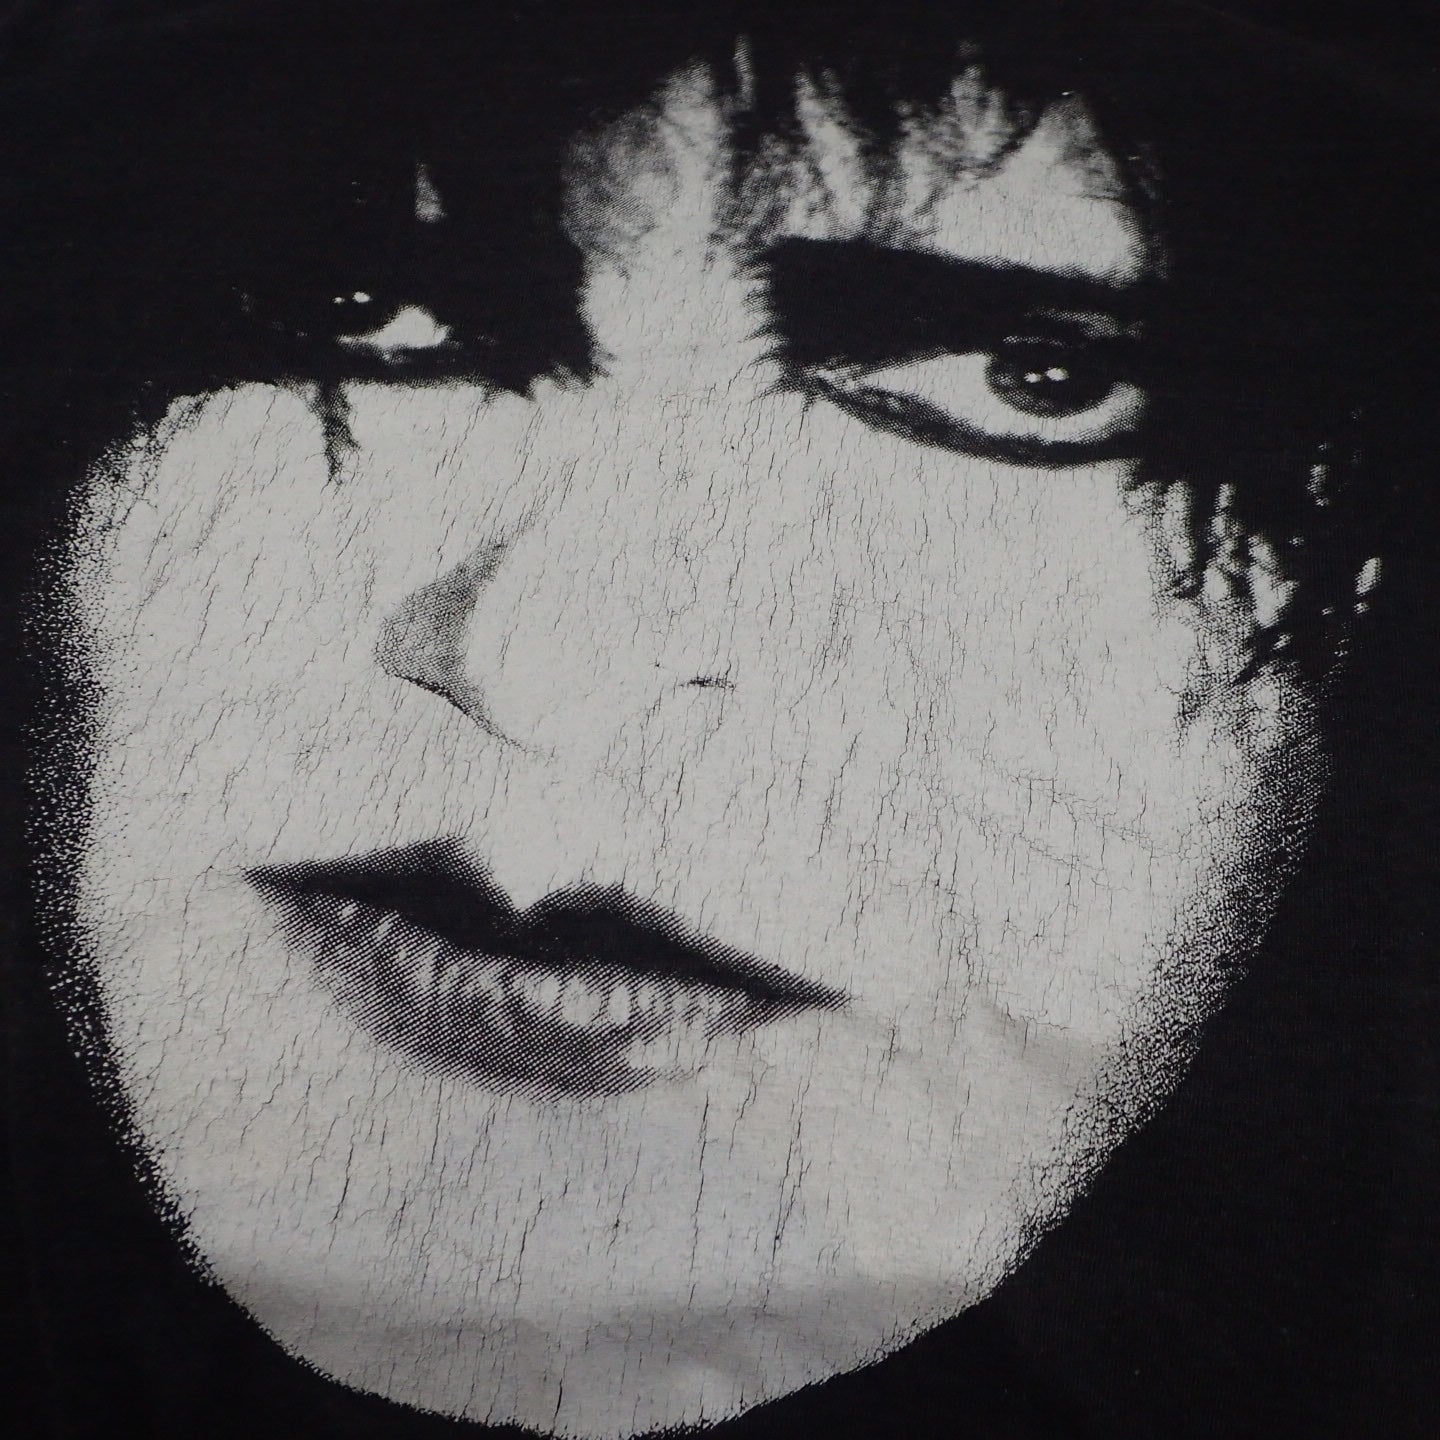 80s Siouxsie and the Banshees " Siouxsie Sioux Tee"